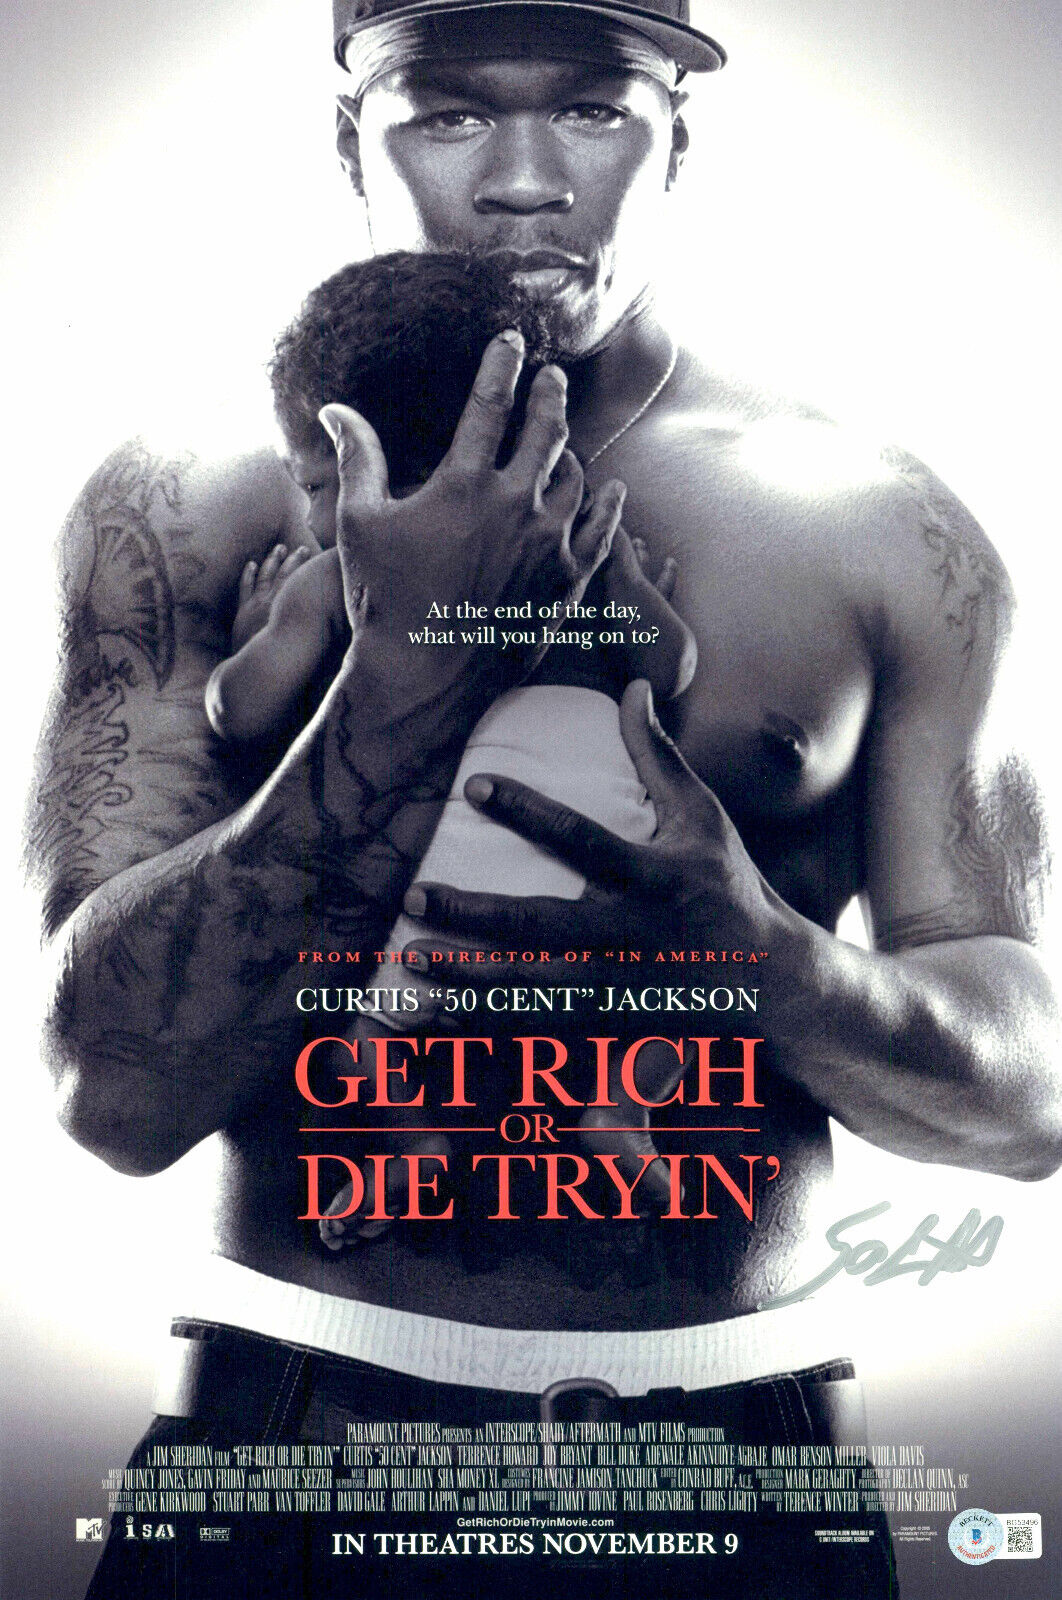 50 CENT SIGNED AUTOGRAPH GET RICH OR DIE TRYIN' 12X18 PHOTO BAS BECKETT